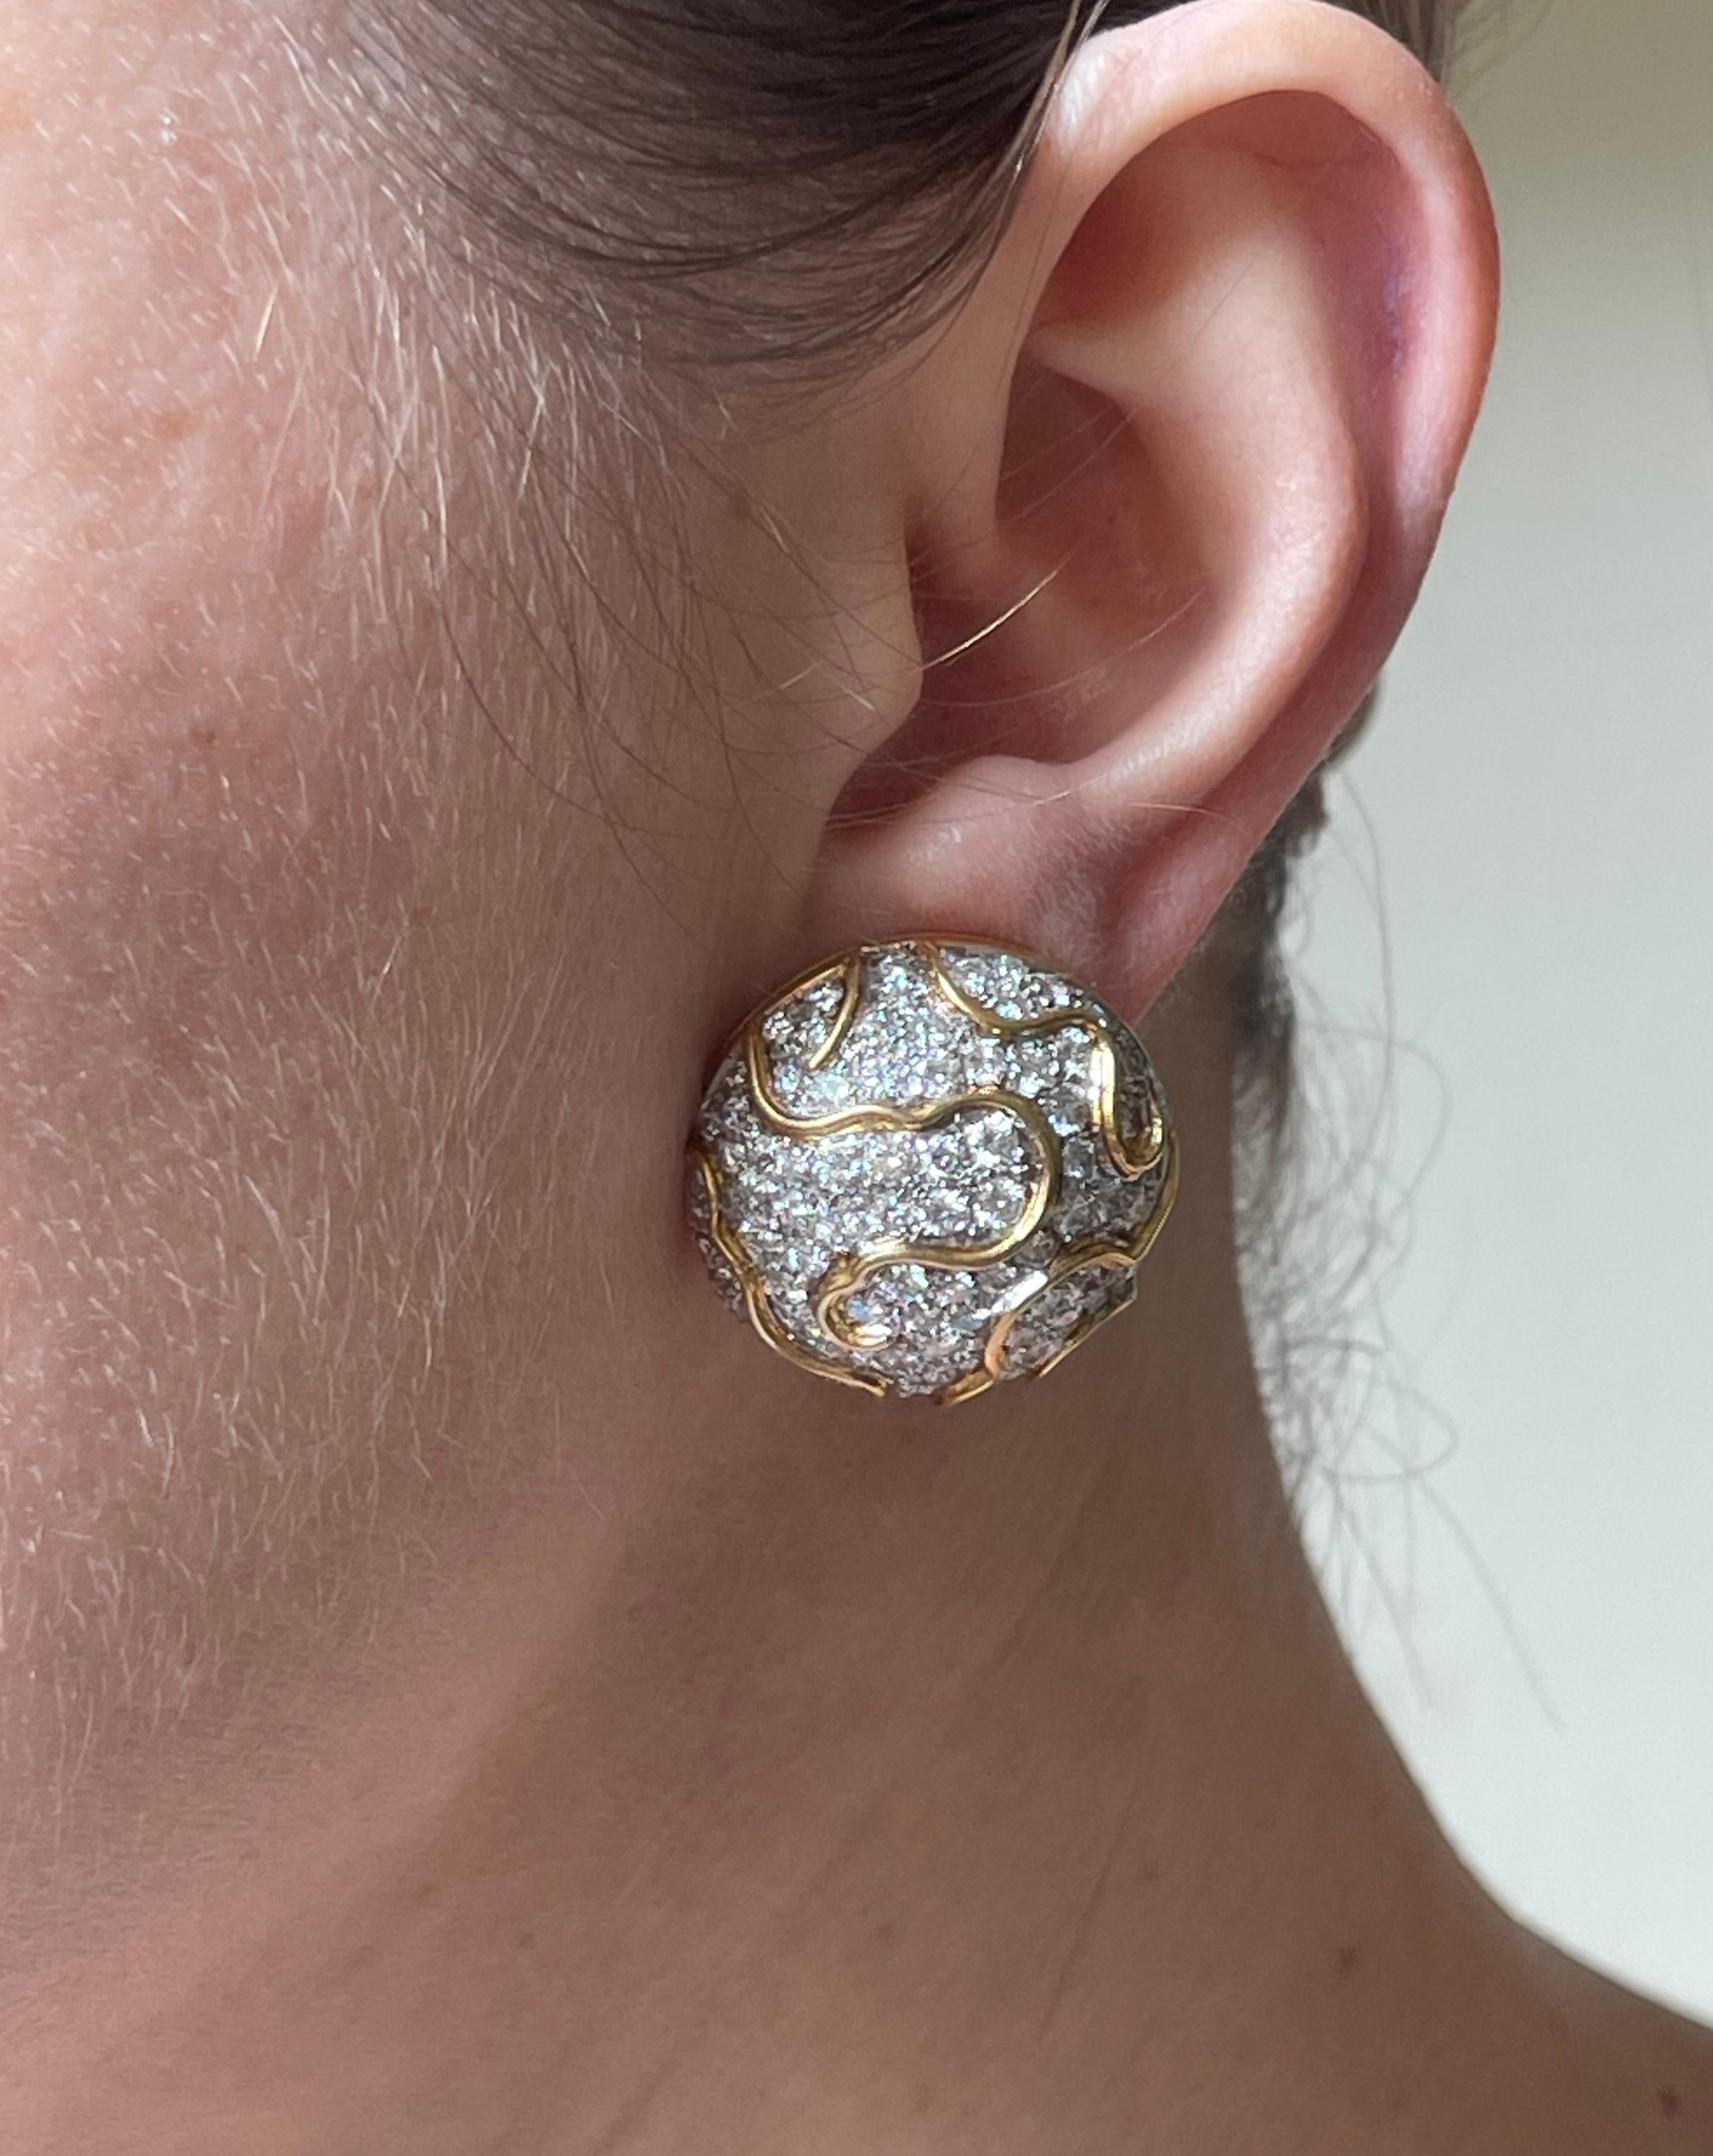 Pair of 18k gold button earrings with approx. 8ctw in GH/VS diamonds. Earrings are 1